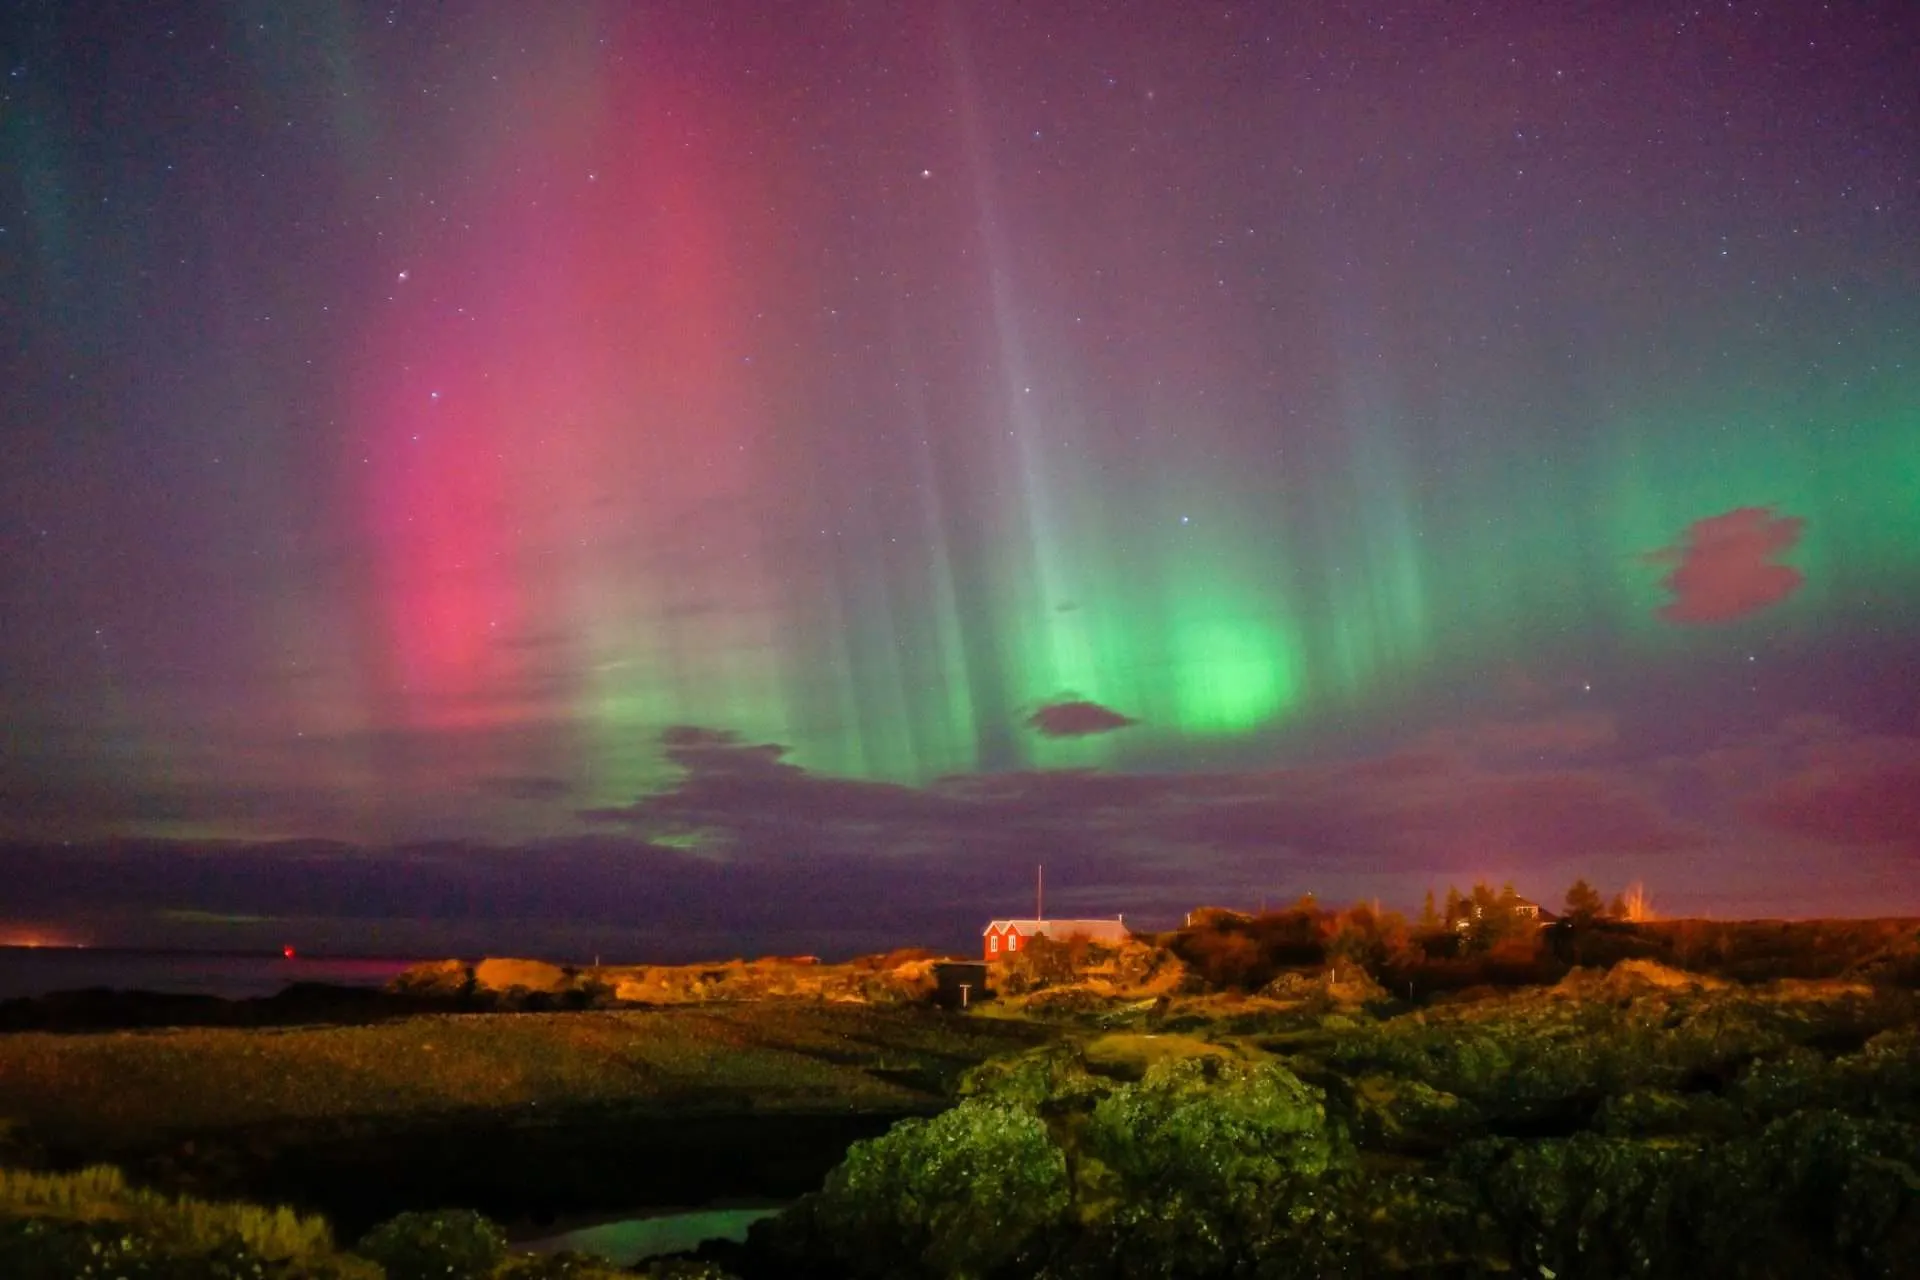 The Northern Lights over a farm.